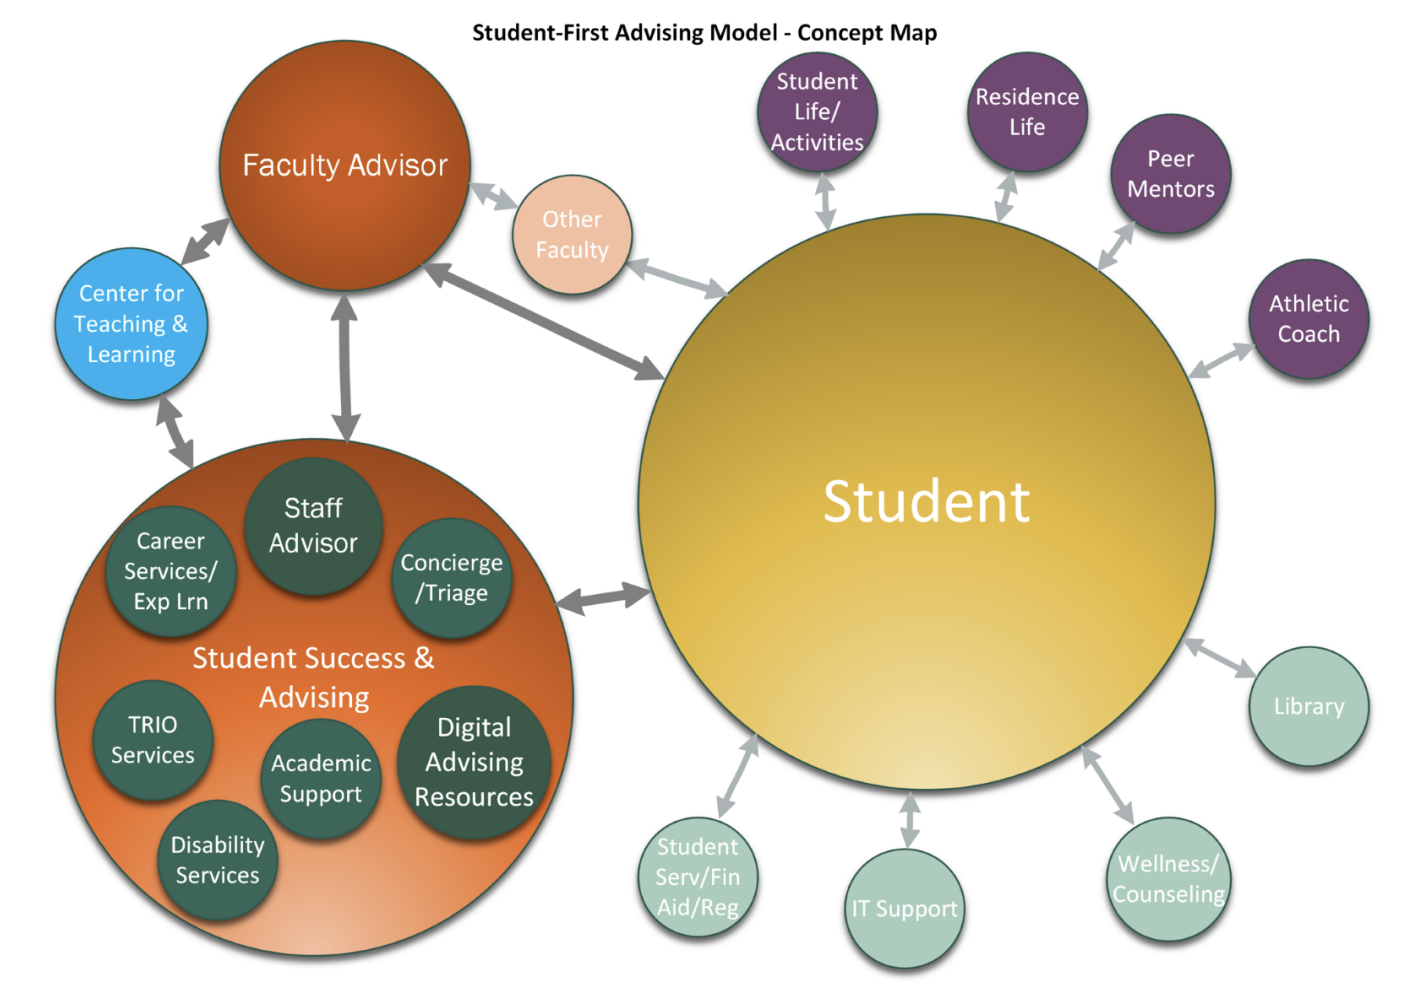 Have You Seen… The Proposed VSU Advising Model?